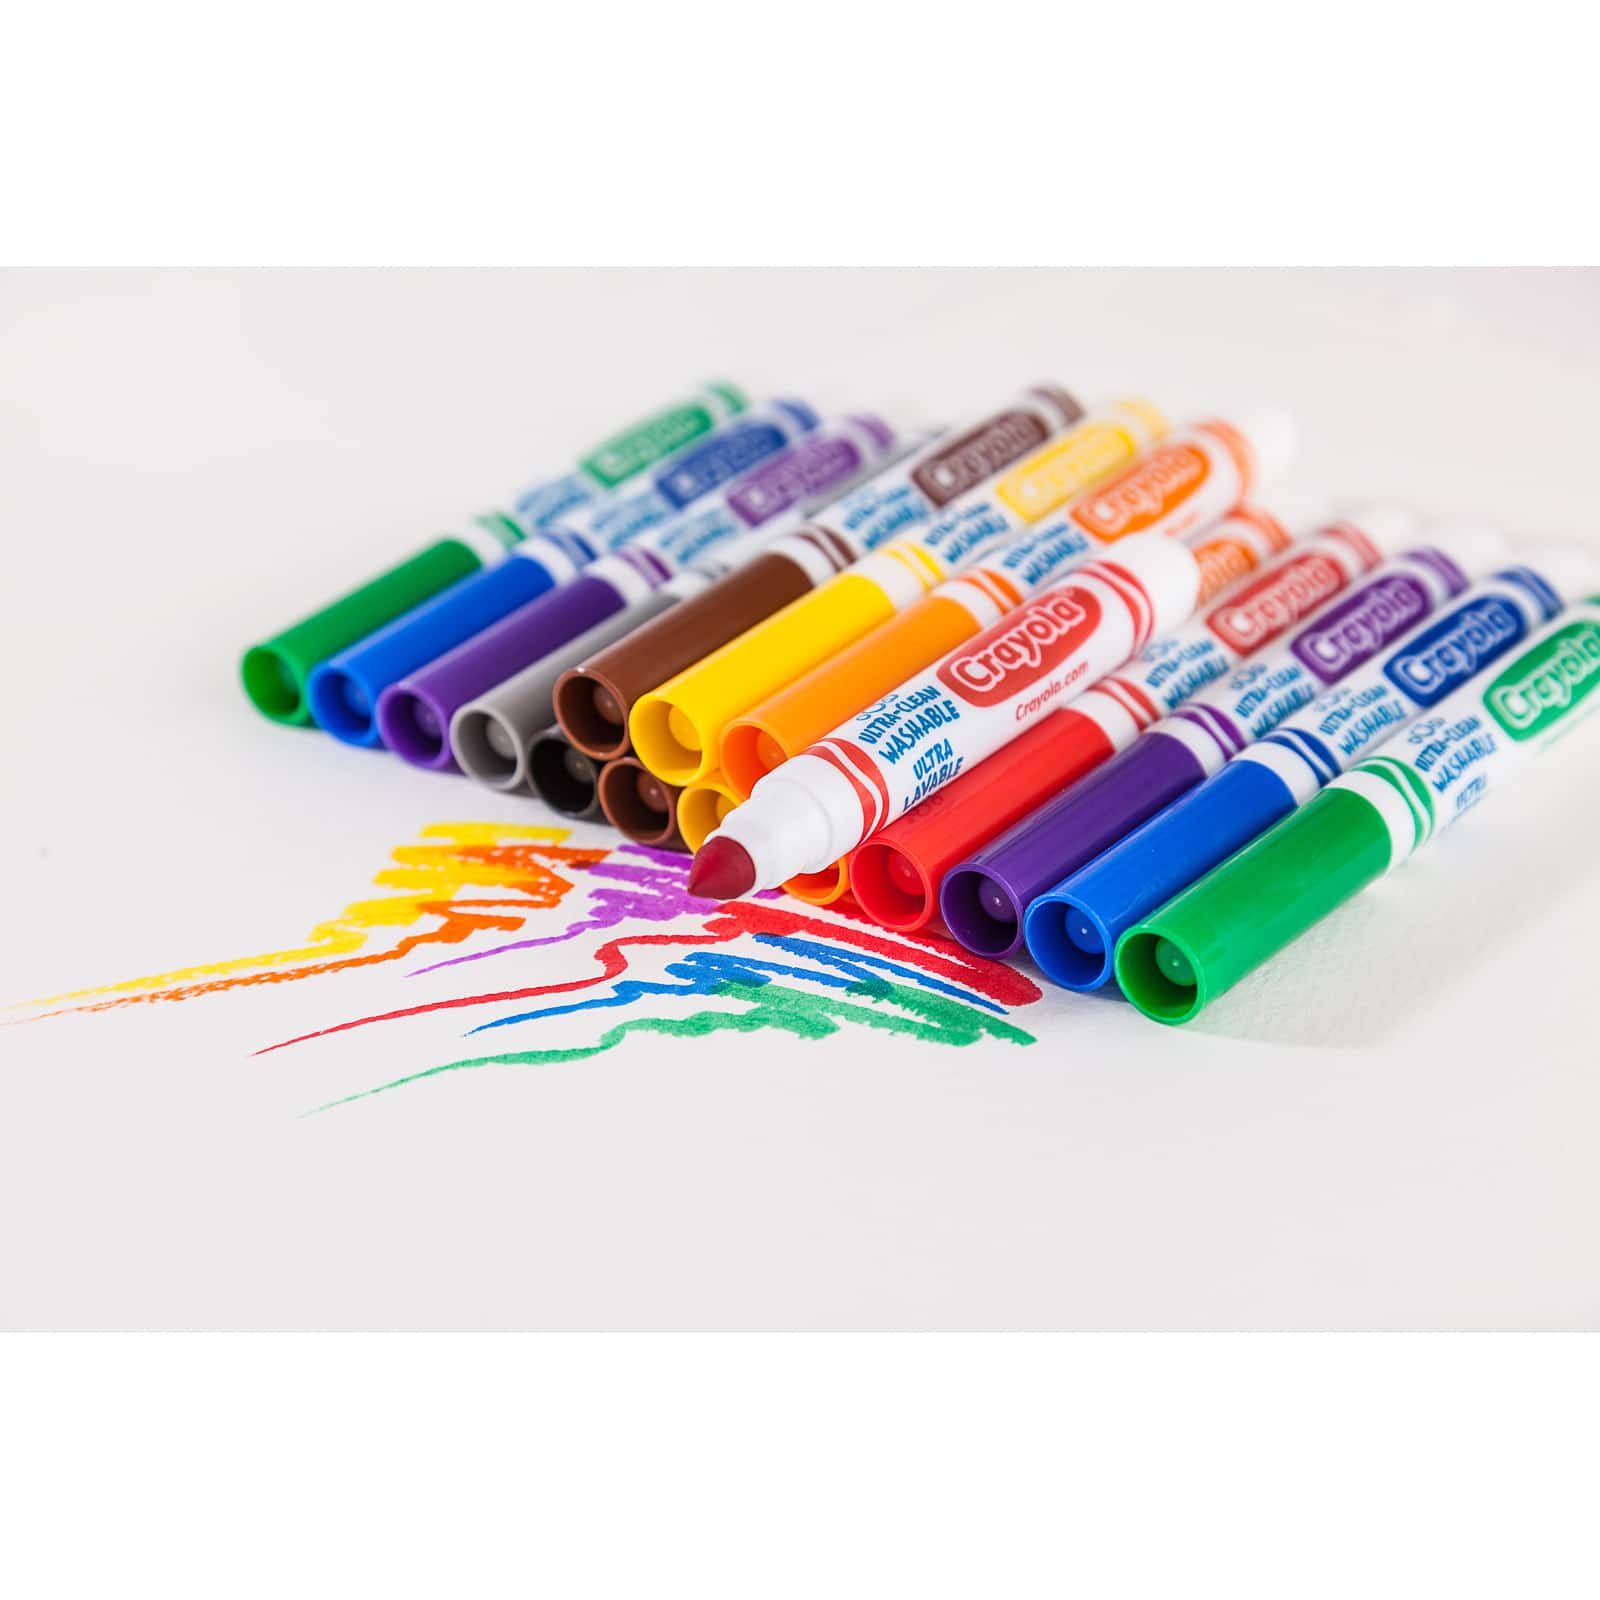 10-Pack Colors of the World Markers (Crayola)